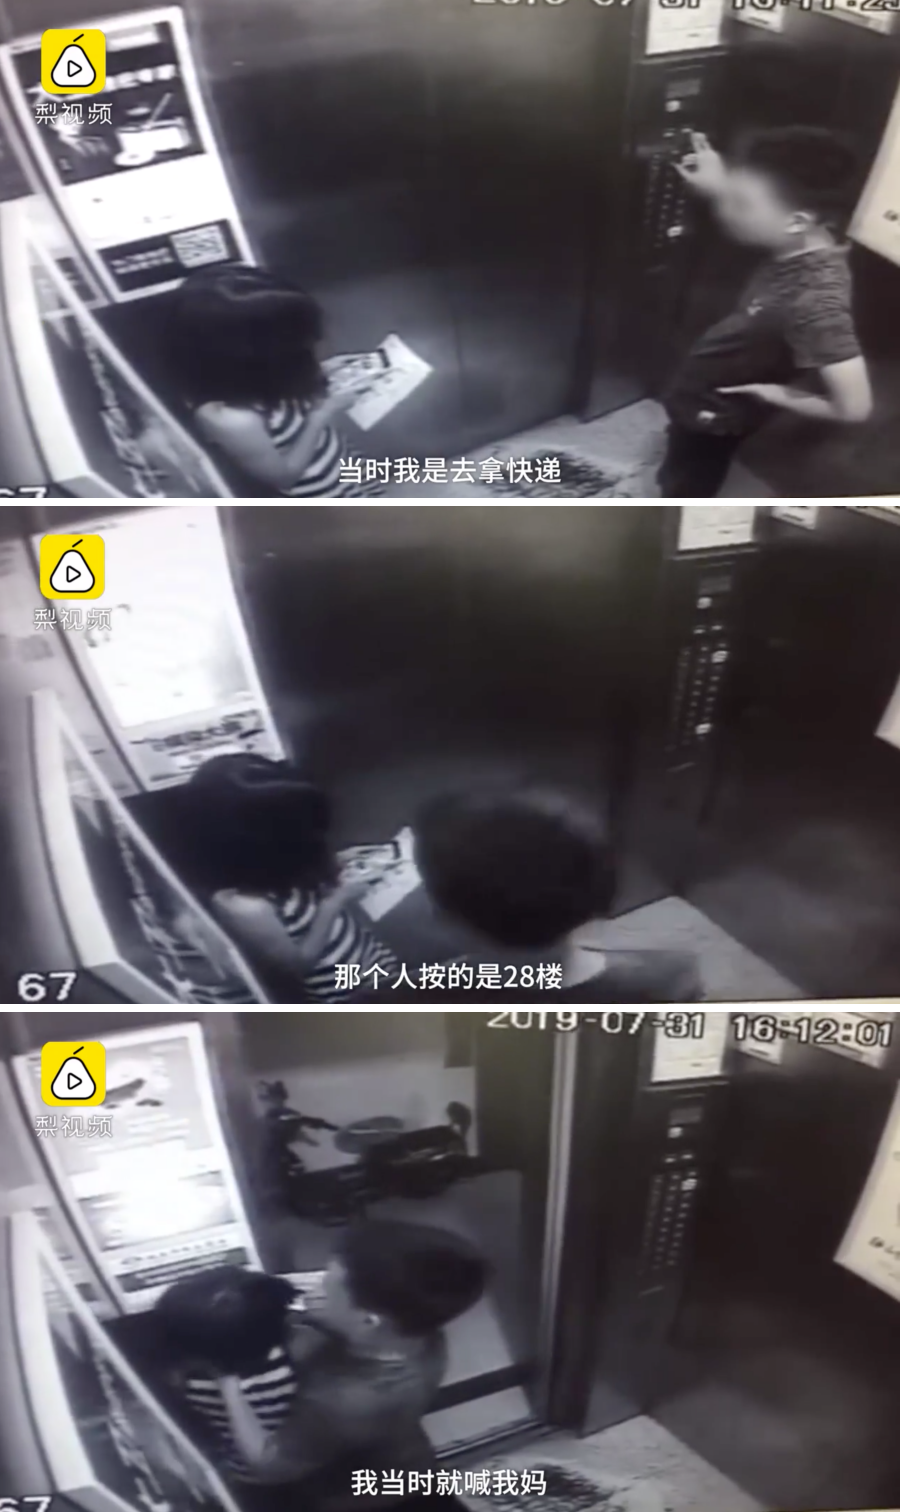 Young Chinese Girl Strangled For 22 Seconds By A Man In Her Apartment Elevator - World Of Buzz 1